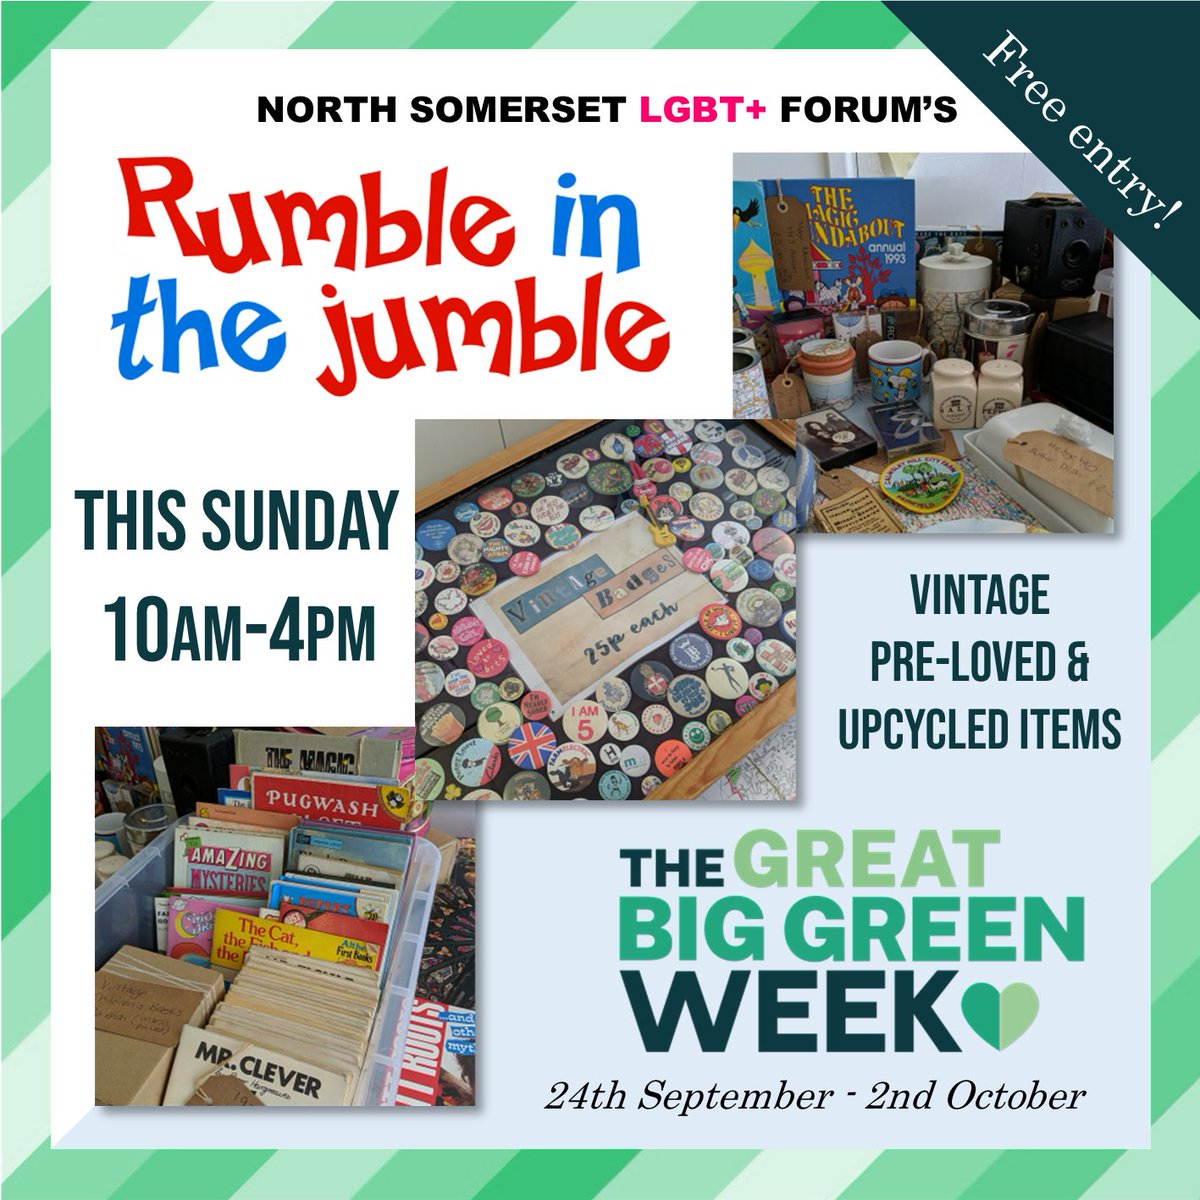 As part of the Big Green Week (running 24 Sept - 2 Oct), we are holding a special Rumble in the Jumble this Sun 25th Sept between 10-4 specially themed to include pre-loved, vintage and upcycled items, which have plenty of life in them to be reused and enjoyed for years to come!